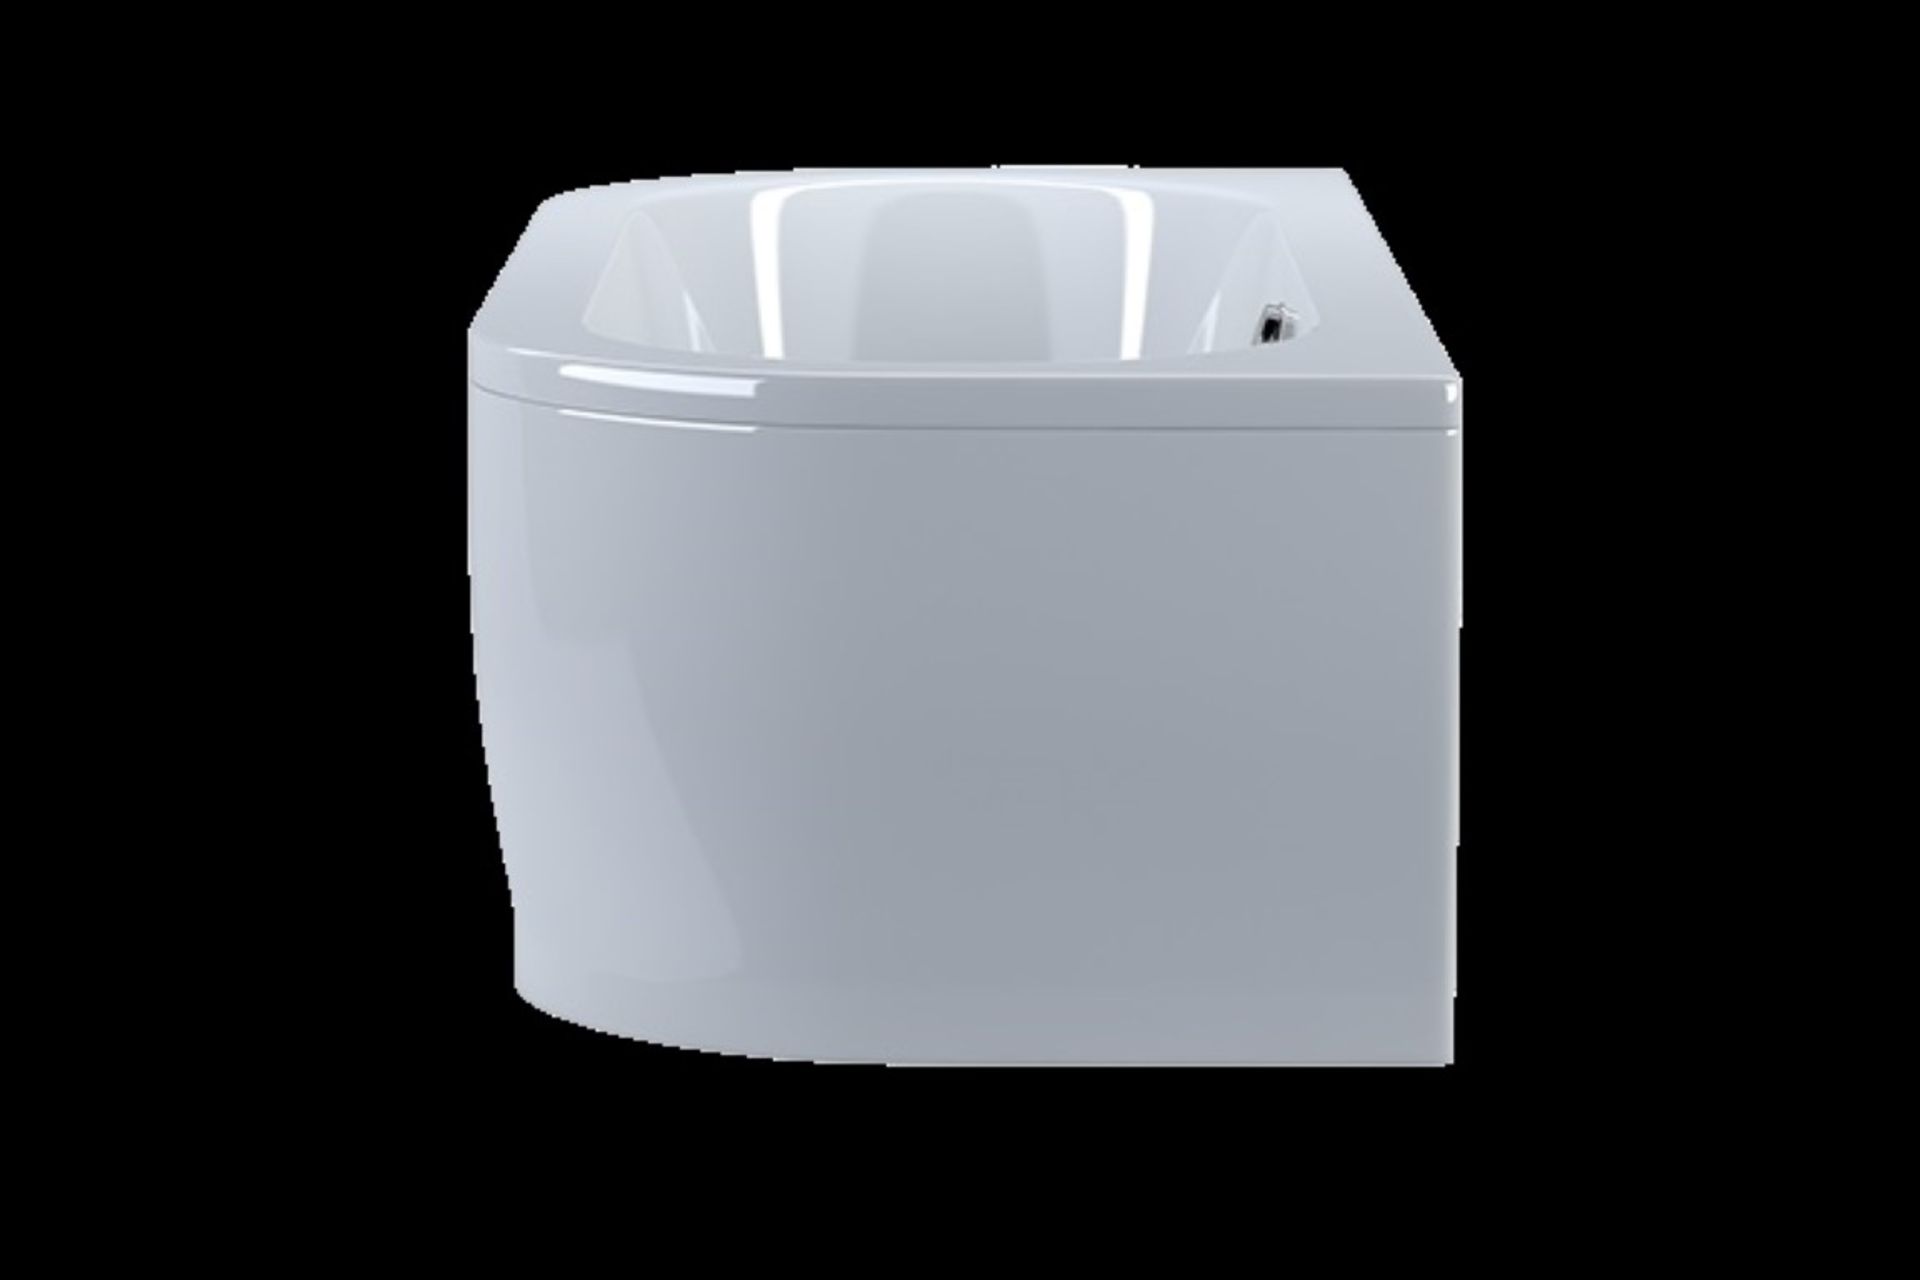 1 x "Palladio" BACK TO WALL BATH - Stylish Curvaceous Design - White Acrylic - 1700 X 750MM - - Image 8 of 9